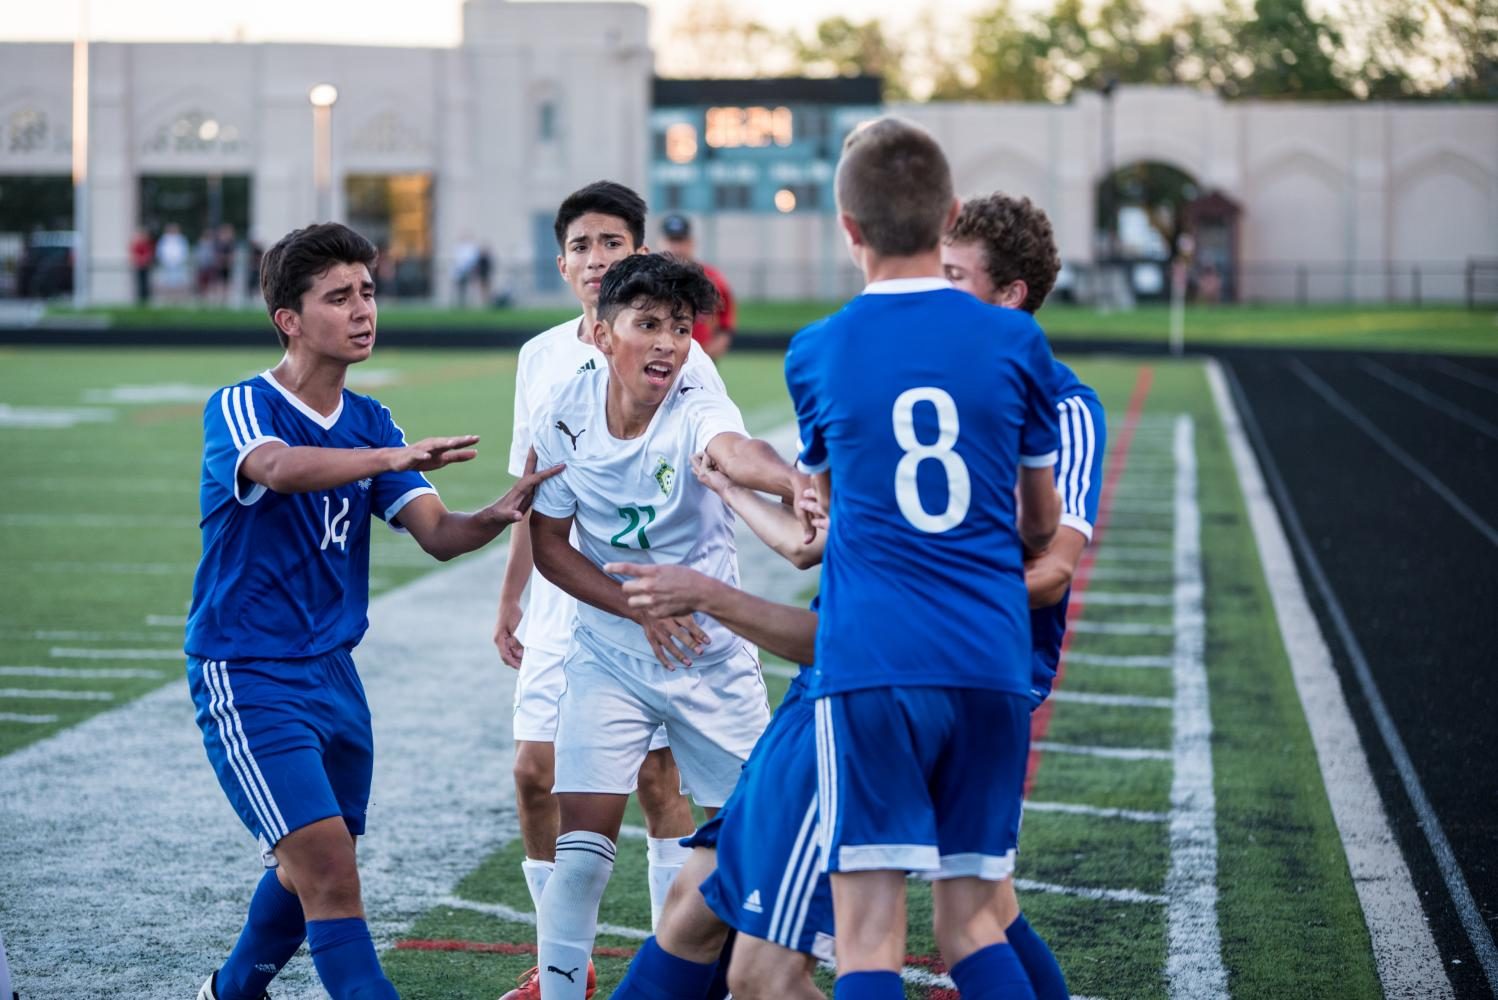 Jose Terrazas, accompanied by some teammates,  takes part in an altercation in an early season game against Taft. The game was called early due to excessive arguing and physicality. (Photo Courtesy of Colin Boyle)